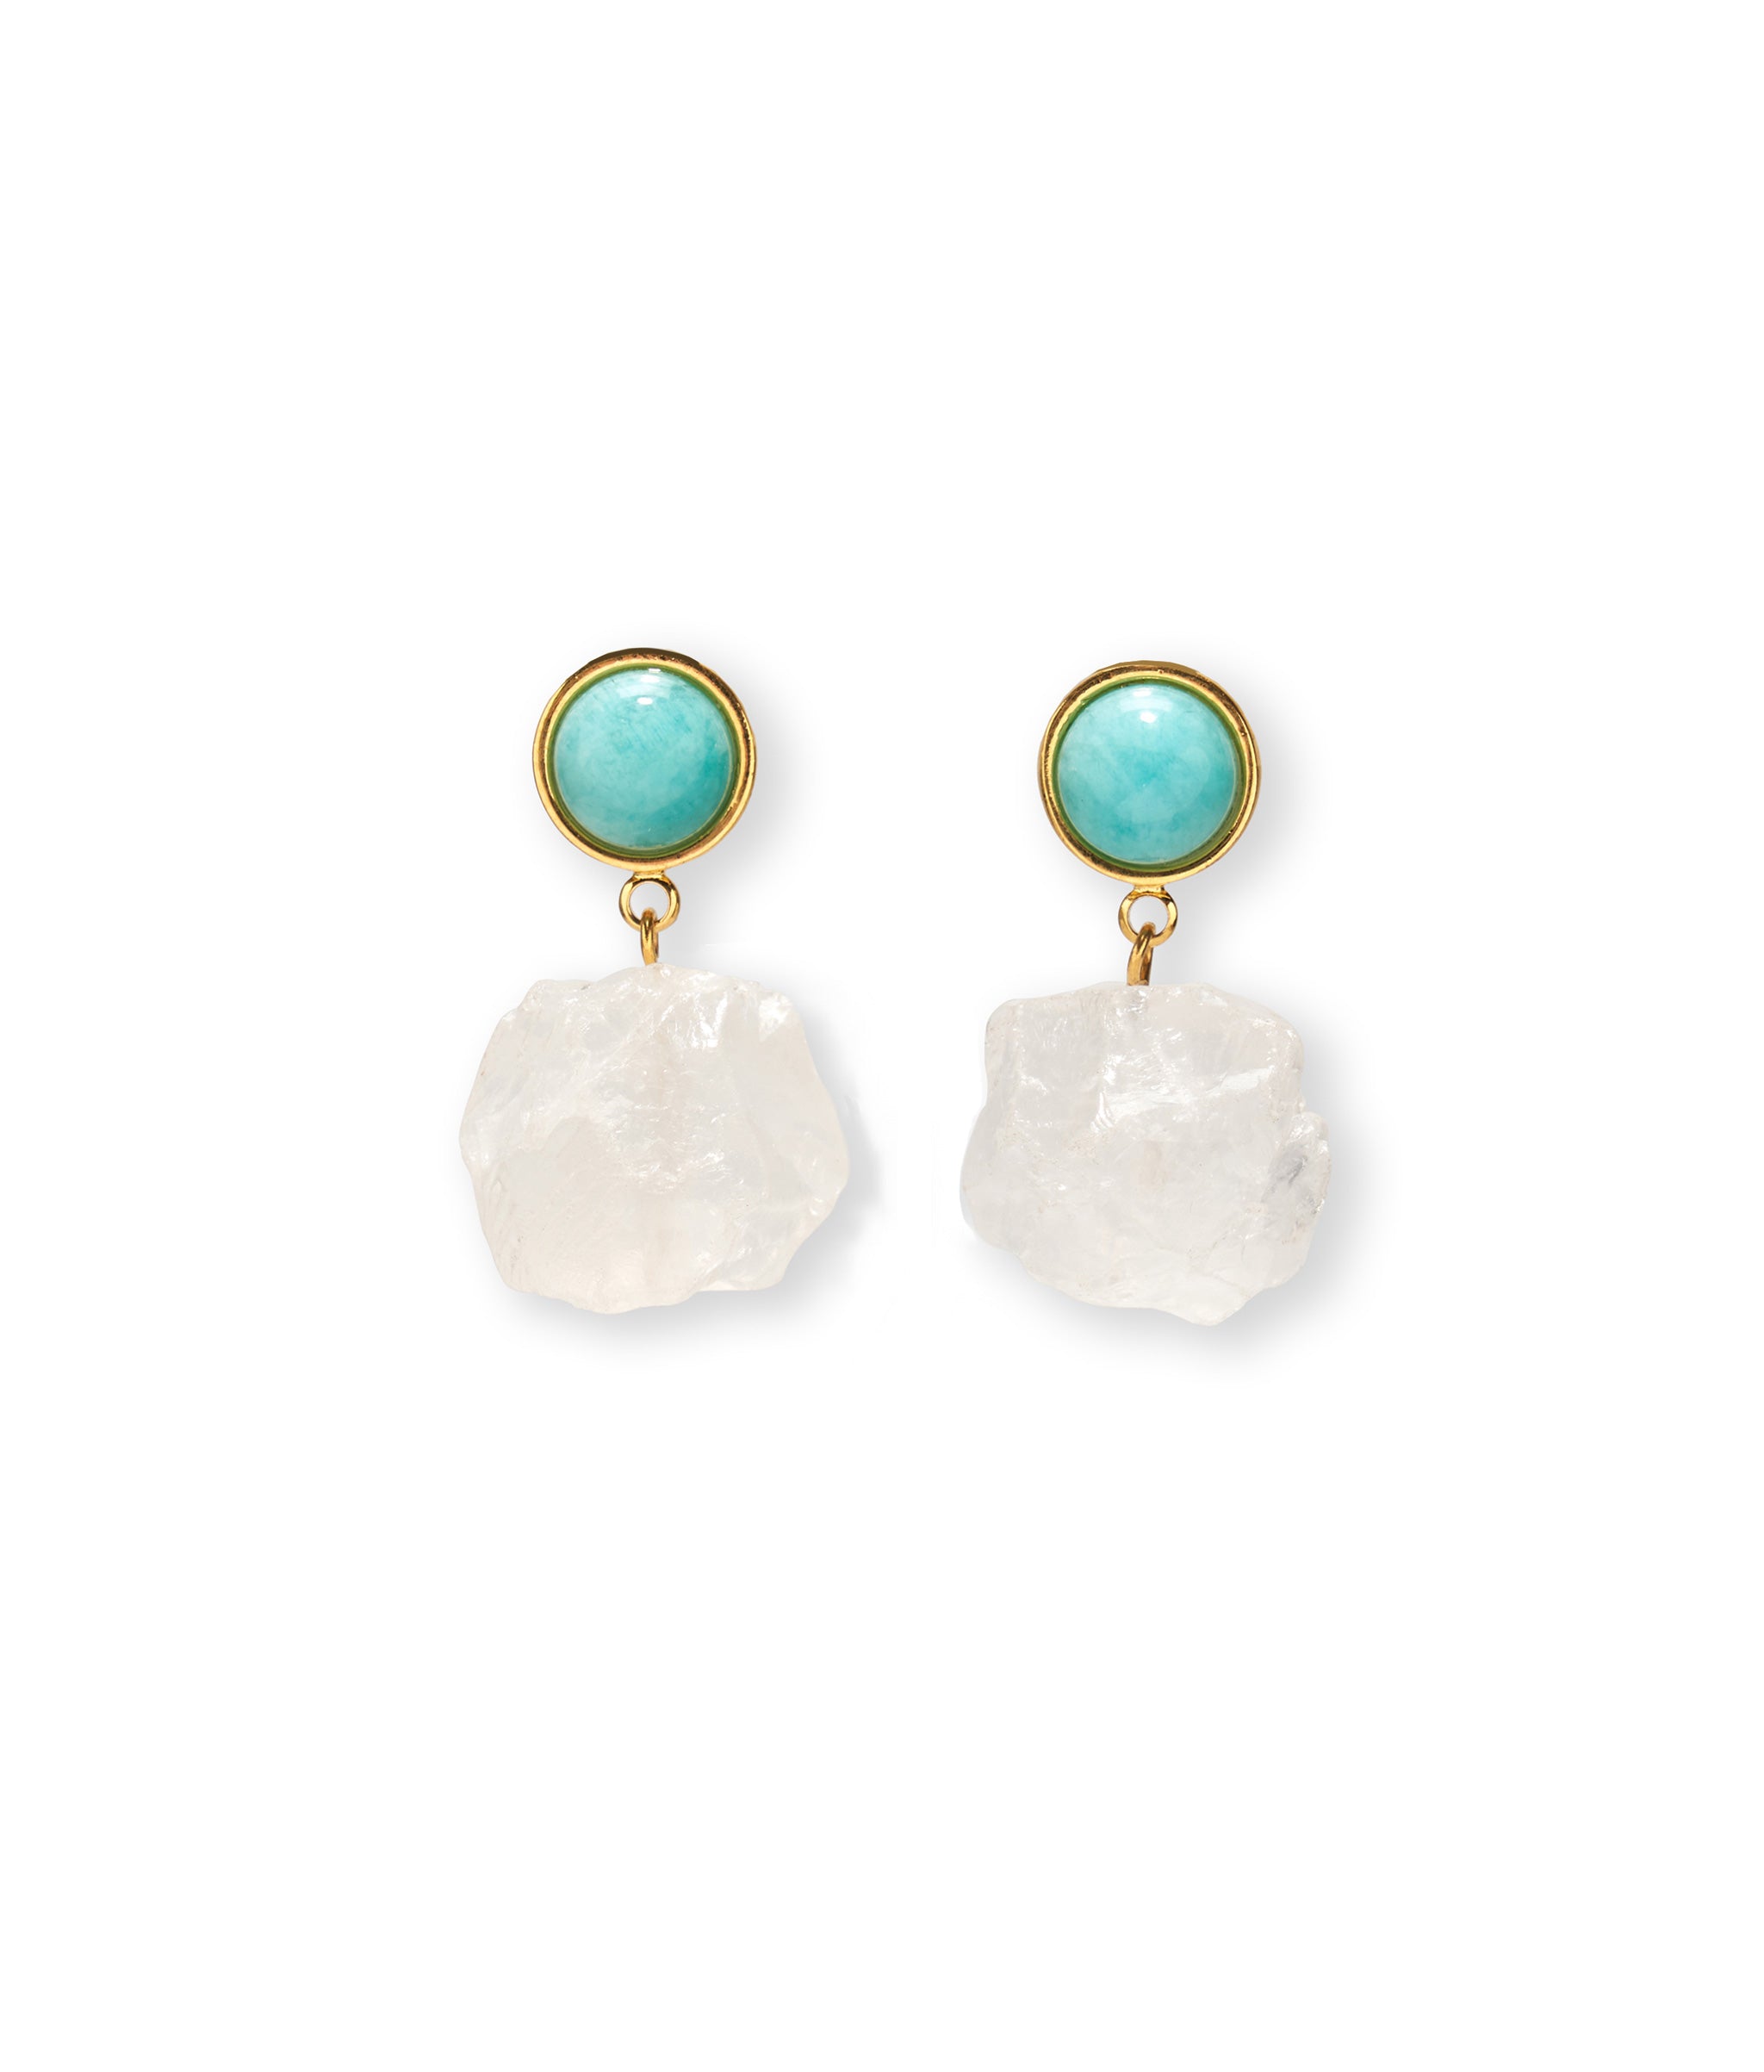 Glacier Bay Earrings in Rock Crystal. Gold-plated brass with amazonite stone tops and crystal quartz nugget drops.